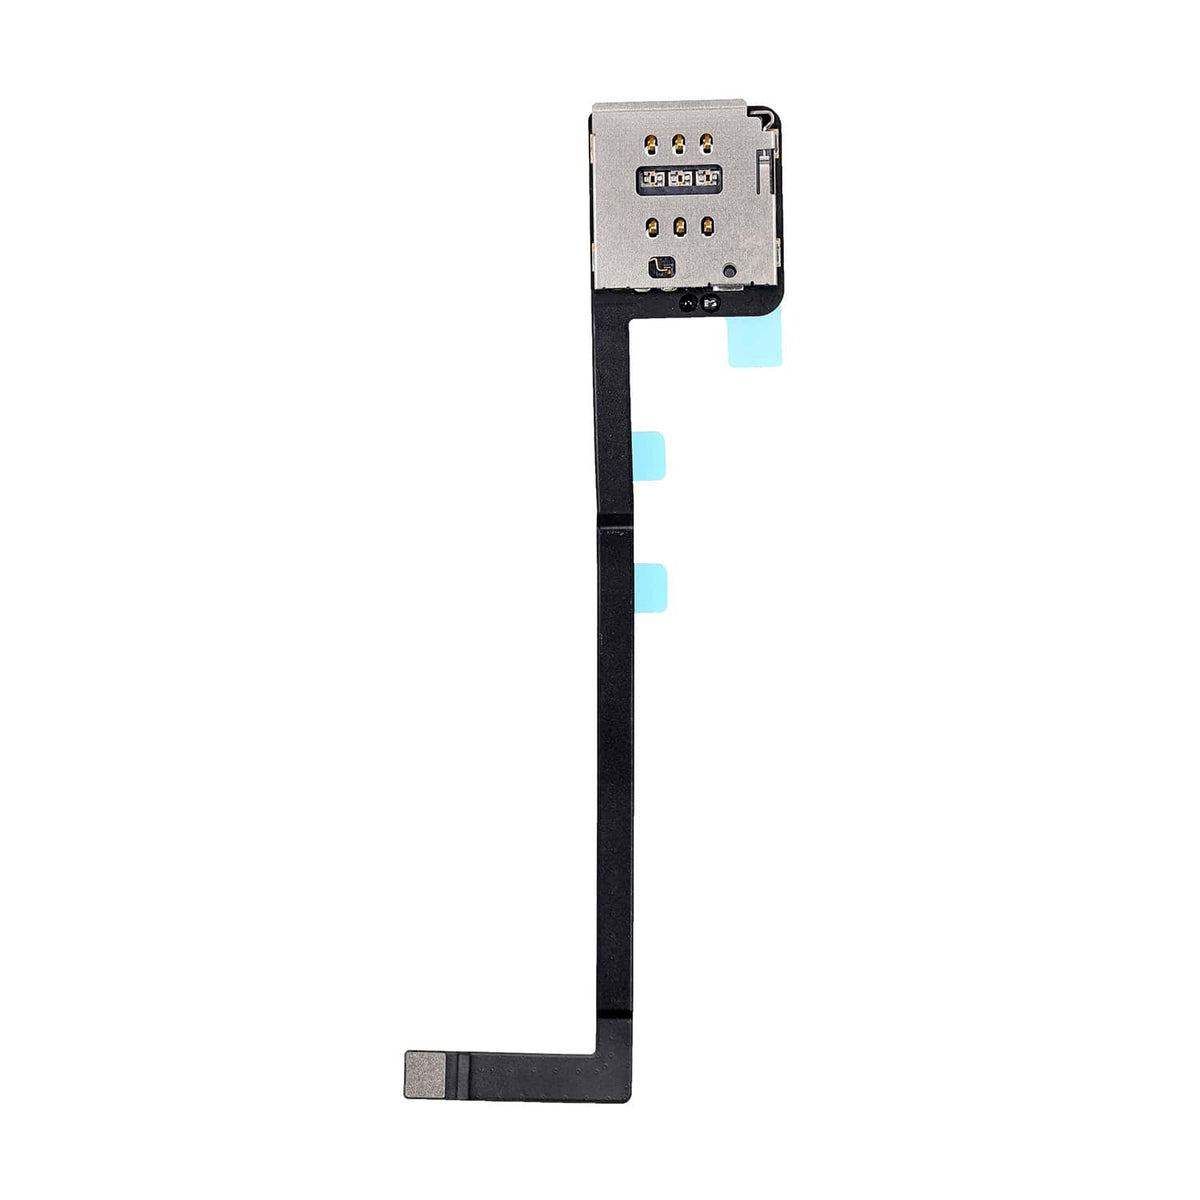 SIM CONTACTOR WITH FLEX CABLE FOR IPAD PRO 12.9" 3RD GEN